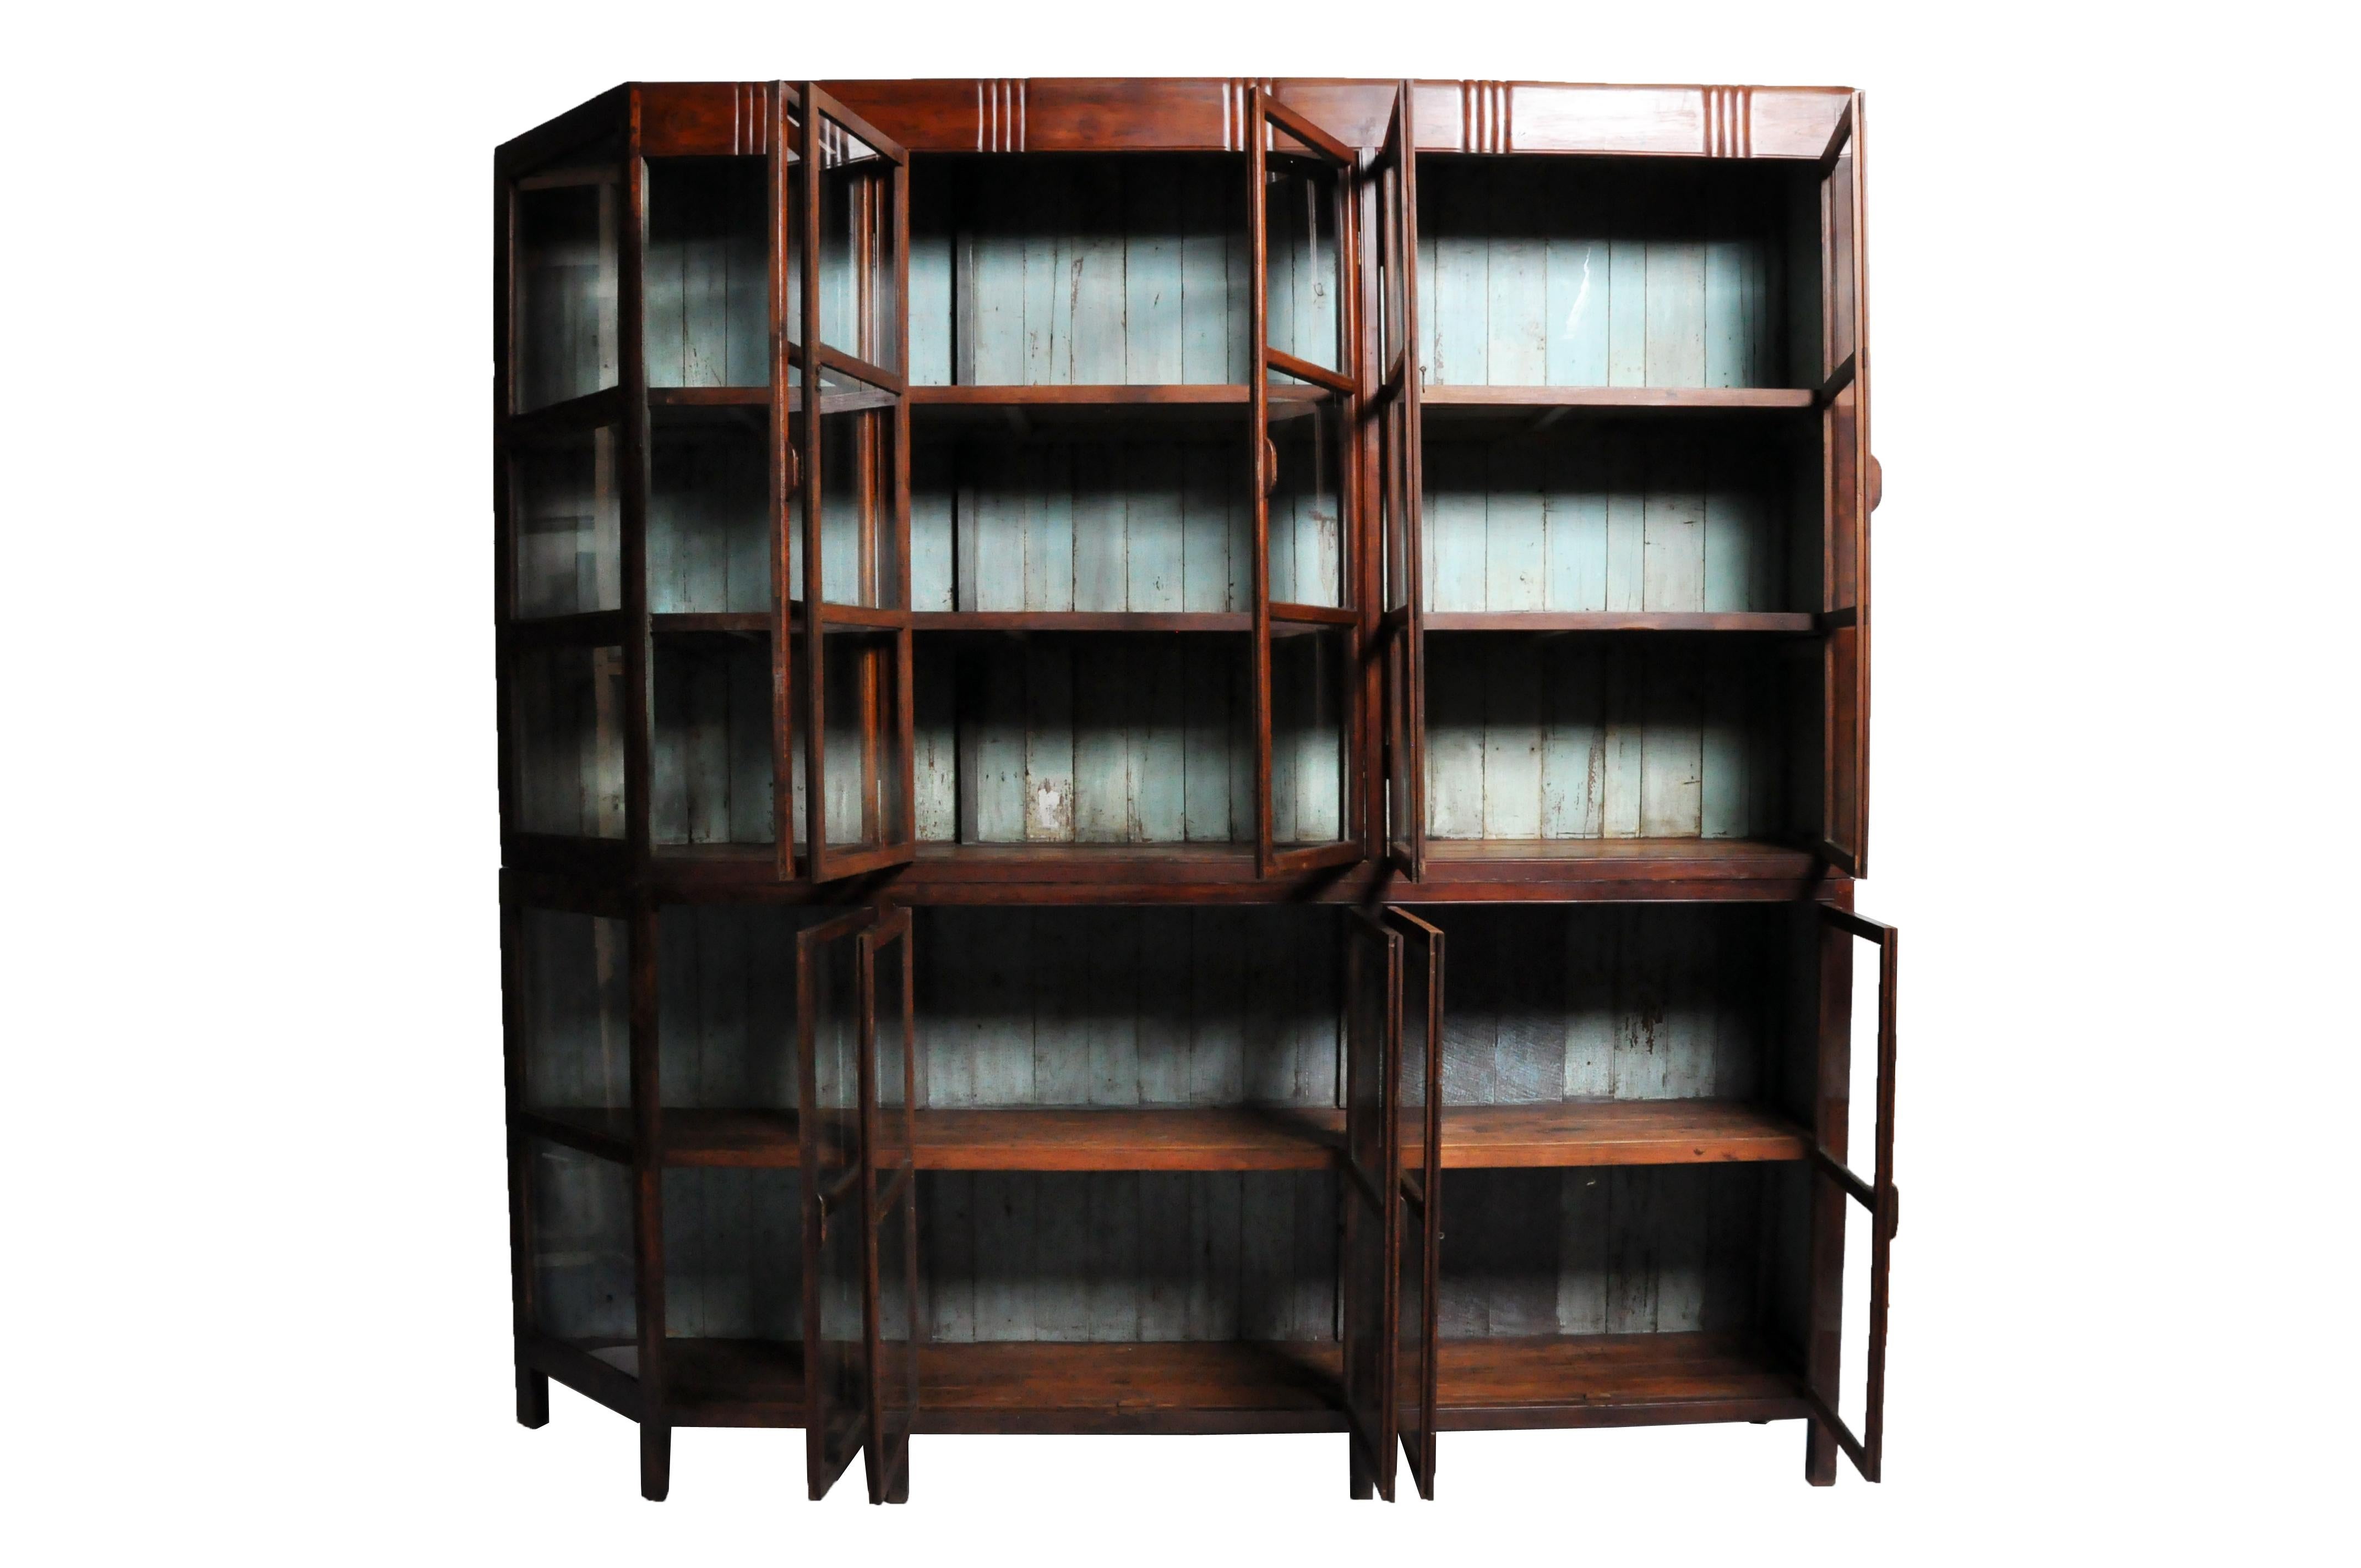 This handsome British Colonial cabinet comes in two parts, the top having a 5 glass doors that open up to shelves for ample storage over another set of 5 glass doors with additional shelves. Both open to compartments lined with shelves. Beautiful